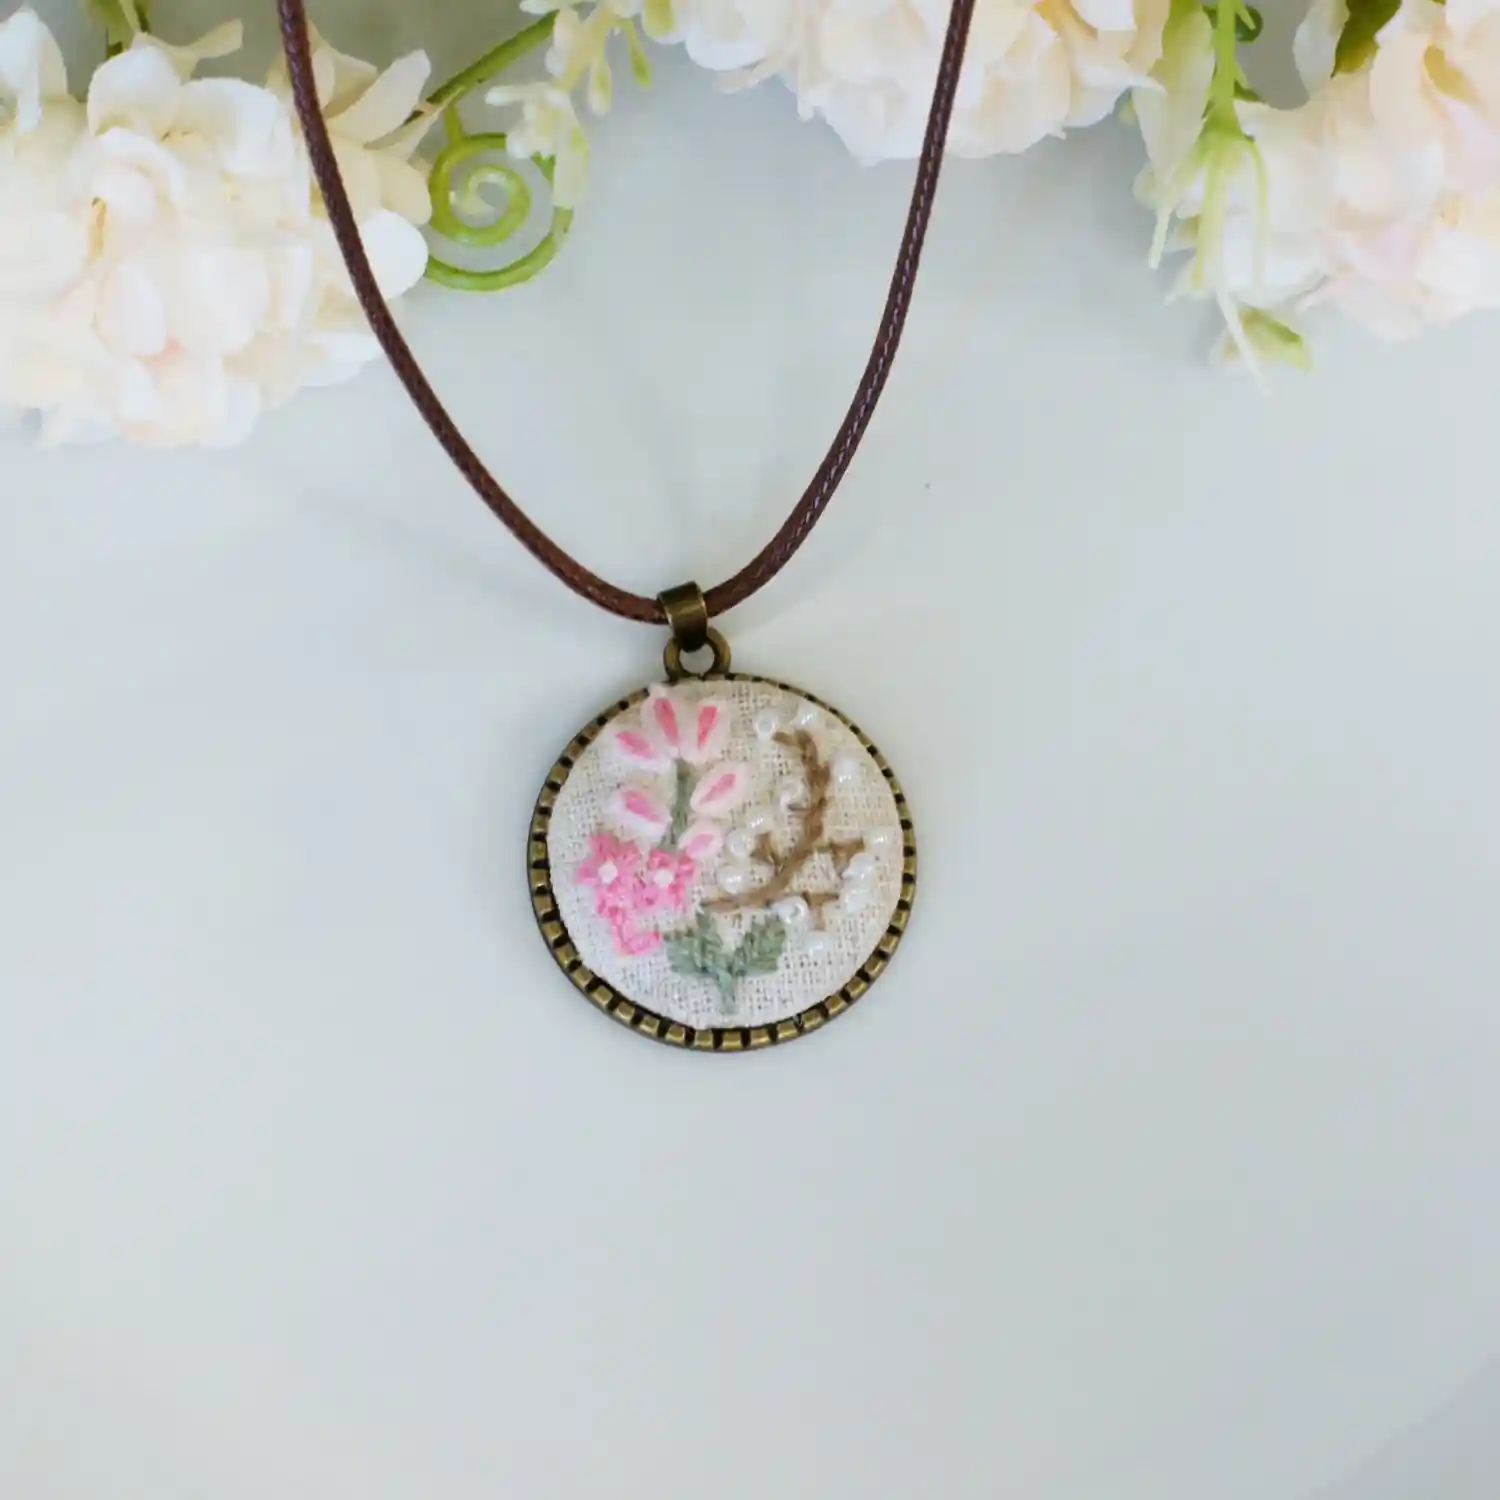 embroidered pink floral pendant